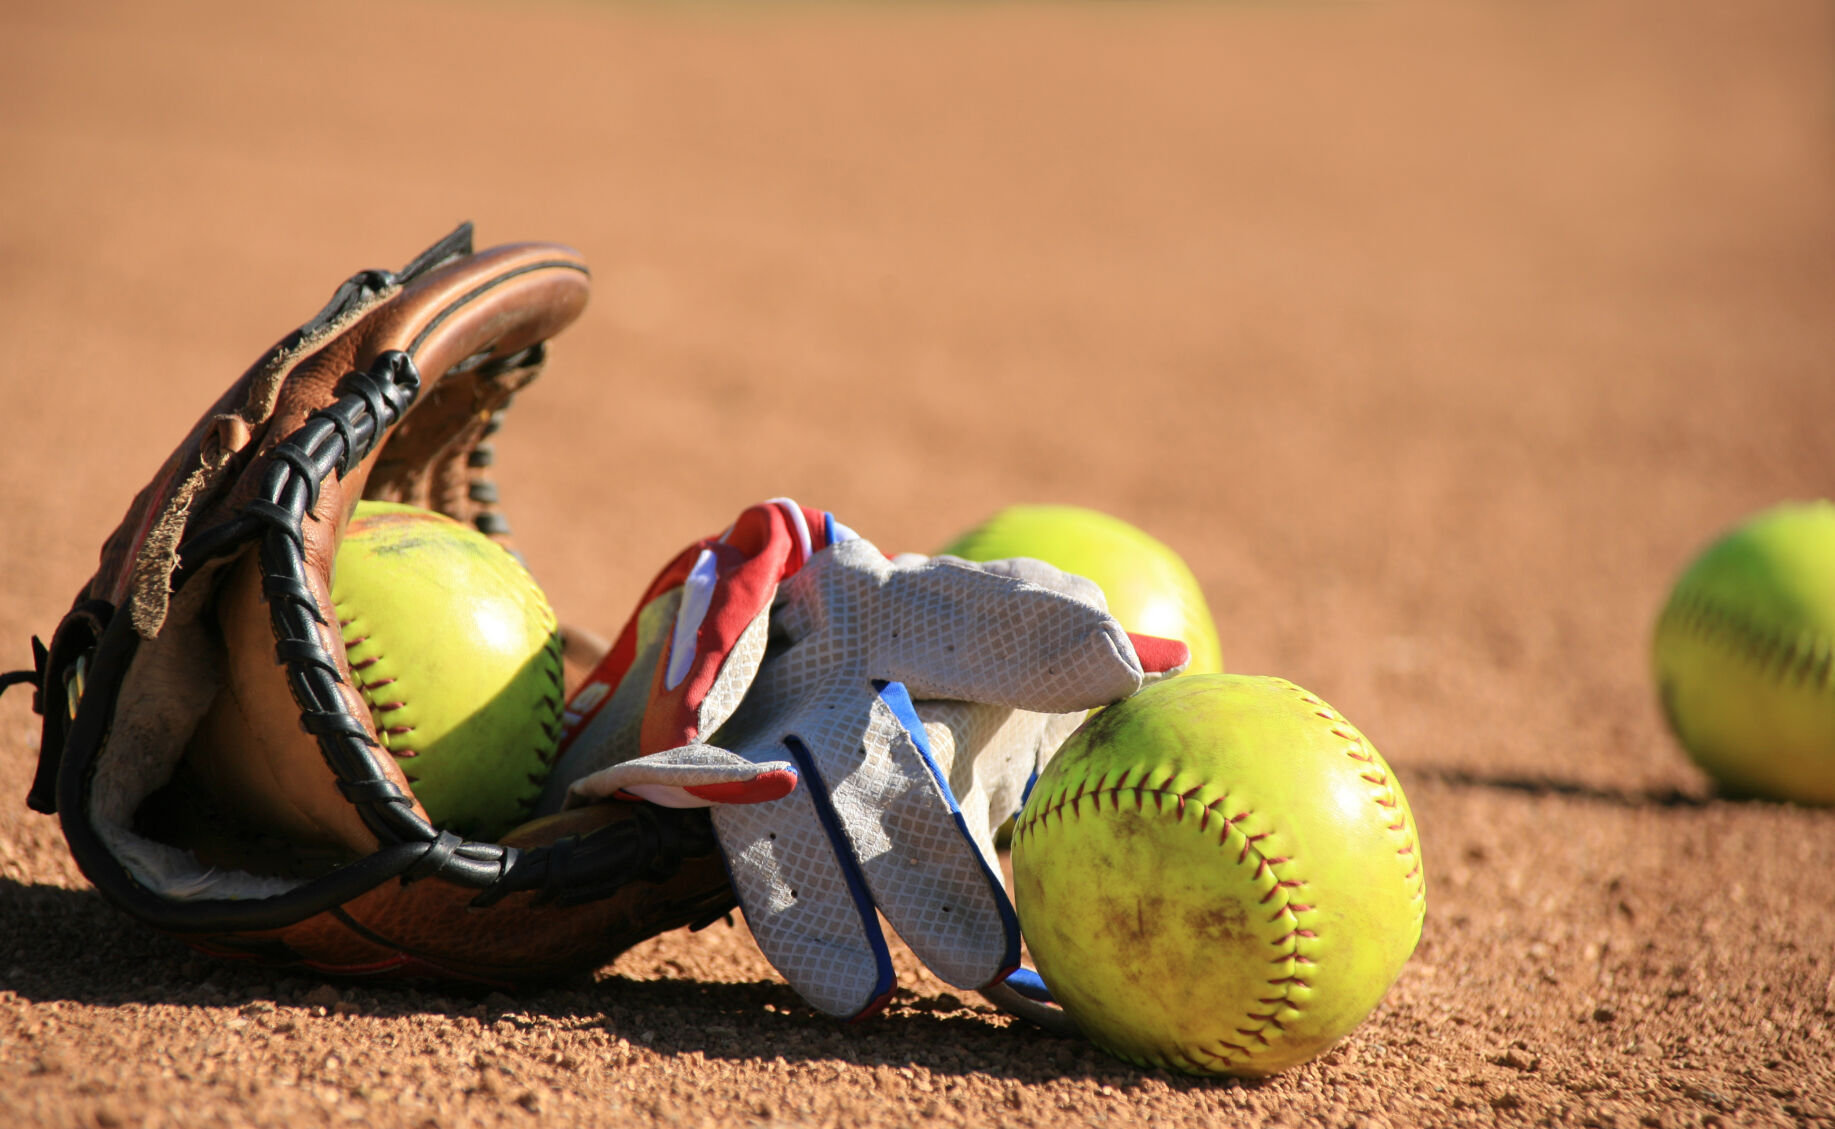 LSWA Class 2A All-State Softball and Baseball Winners Revealed – Outstanding Players and Coaches Announced